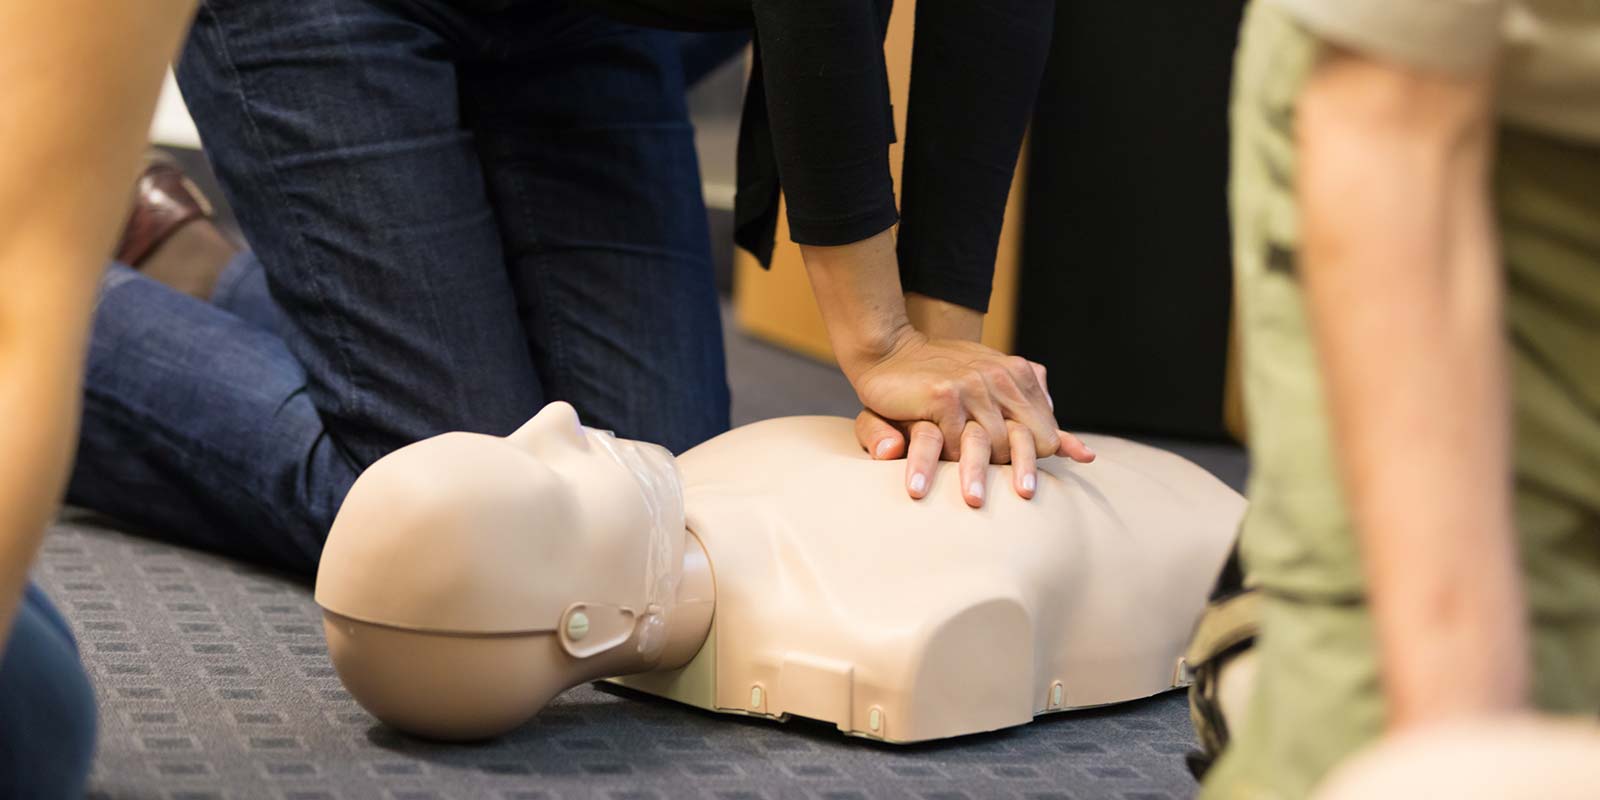 First Aid Training Courses Norfolk